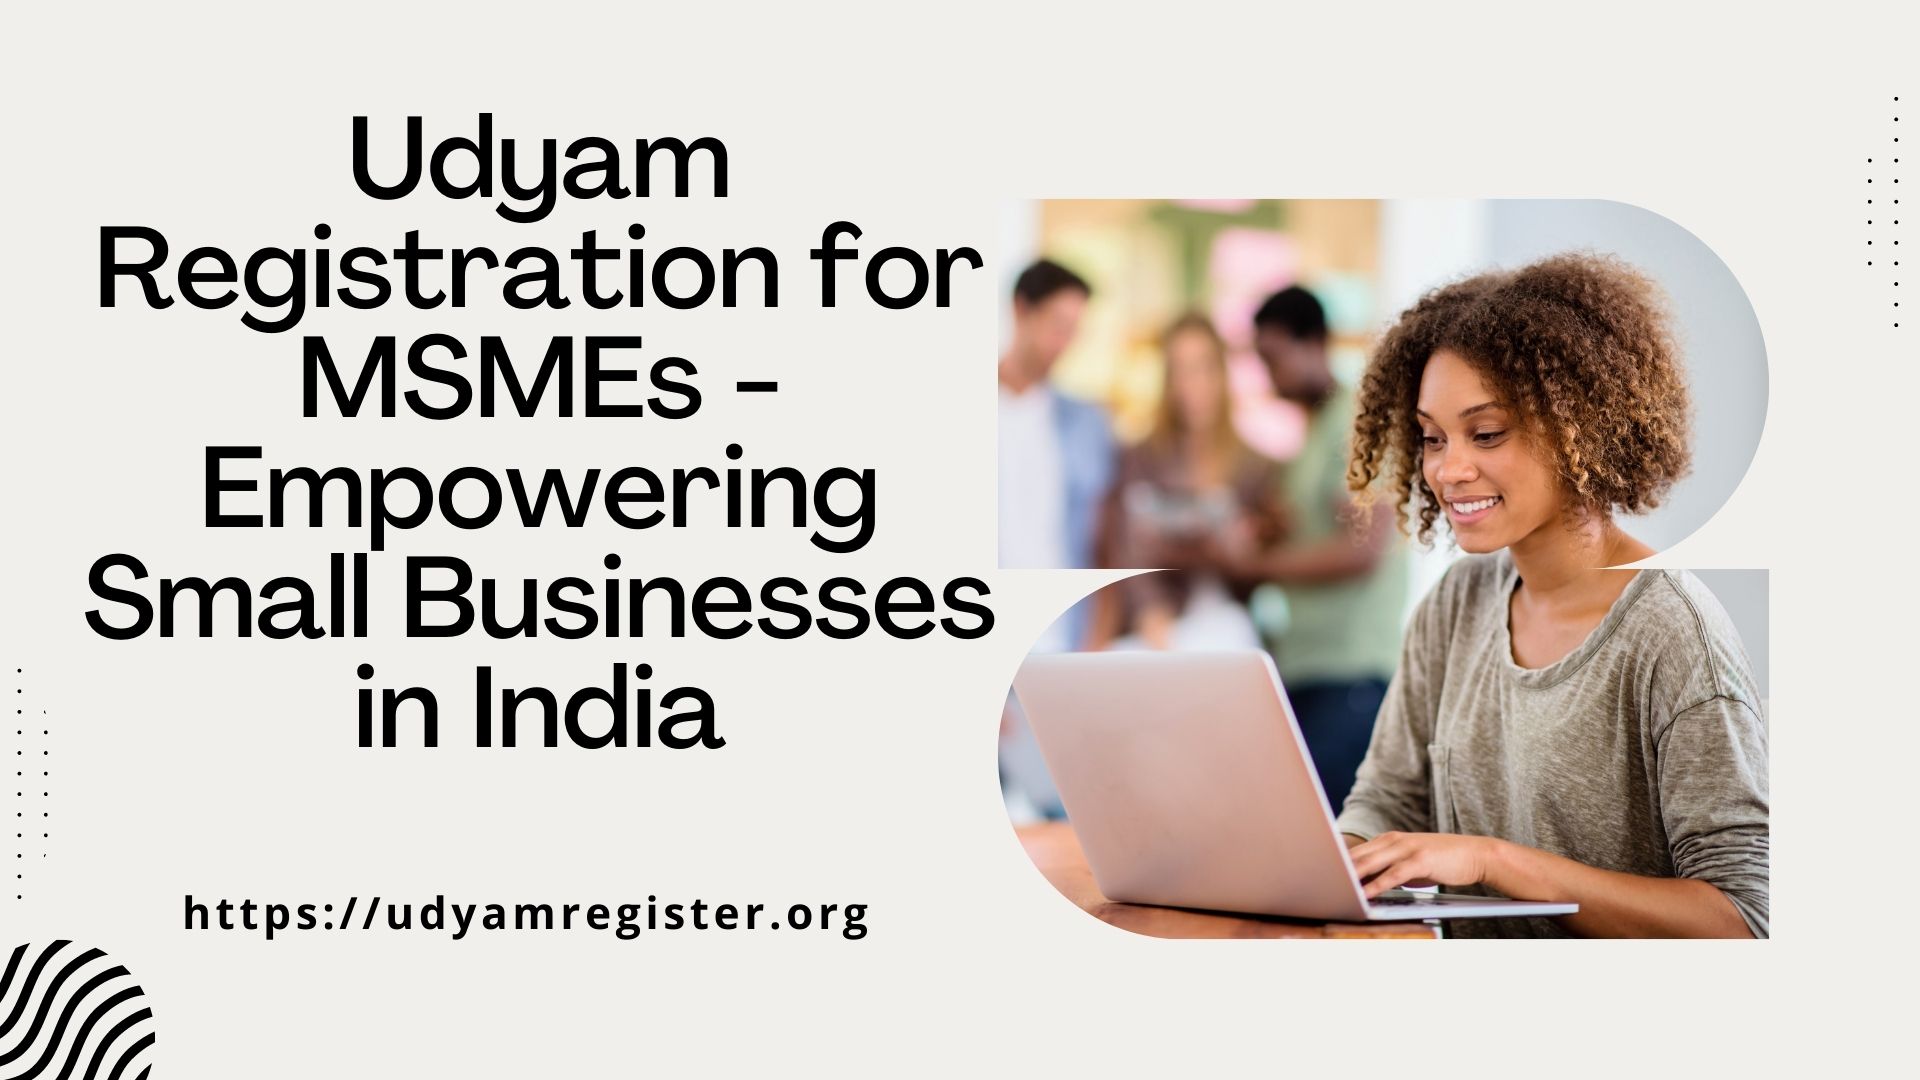 Udyam Registration for MSMEs - Empowering Small Businesses in India